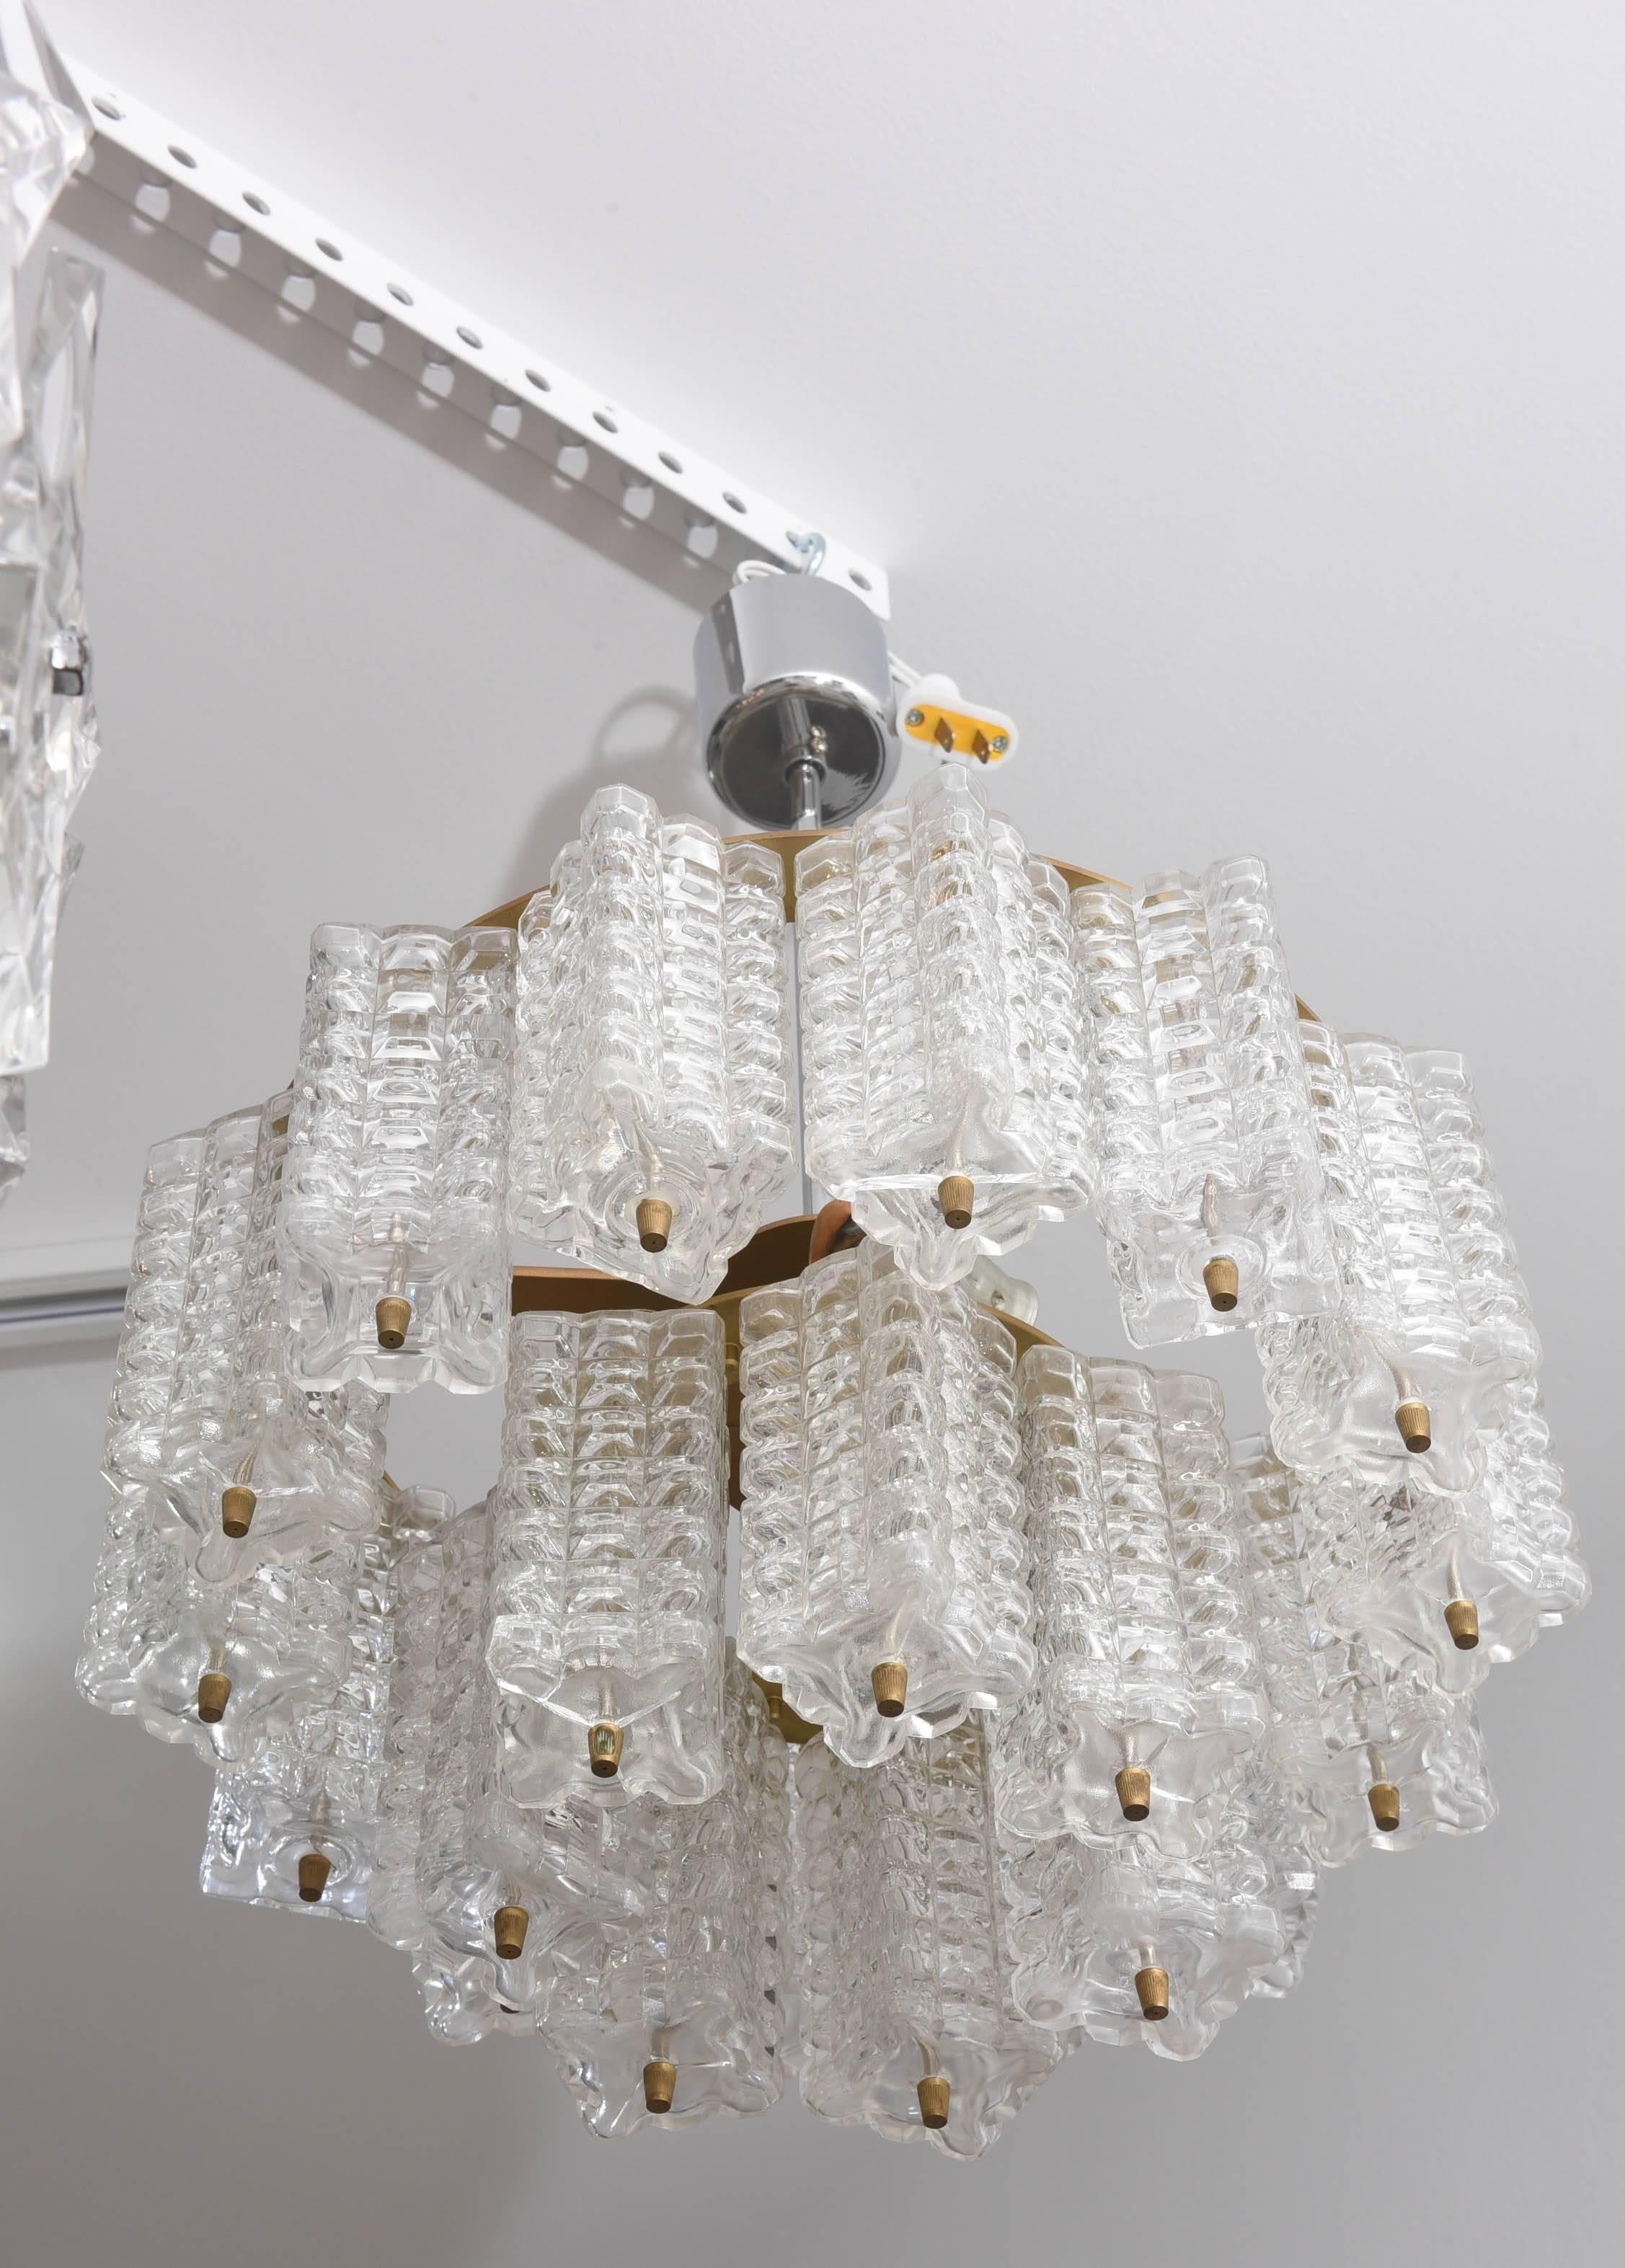 This mid-century modern chandelier is from the iconic firm Austrolux of Austria and was made in the 1960s.  There are 21 molded-glass prisms in a 